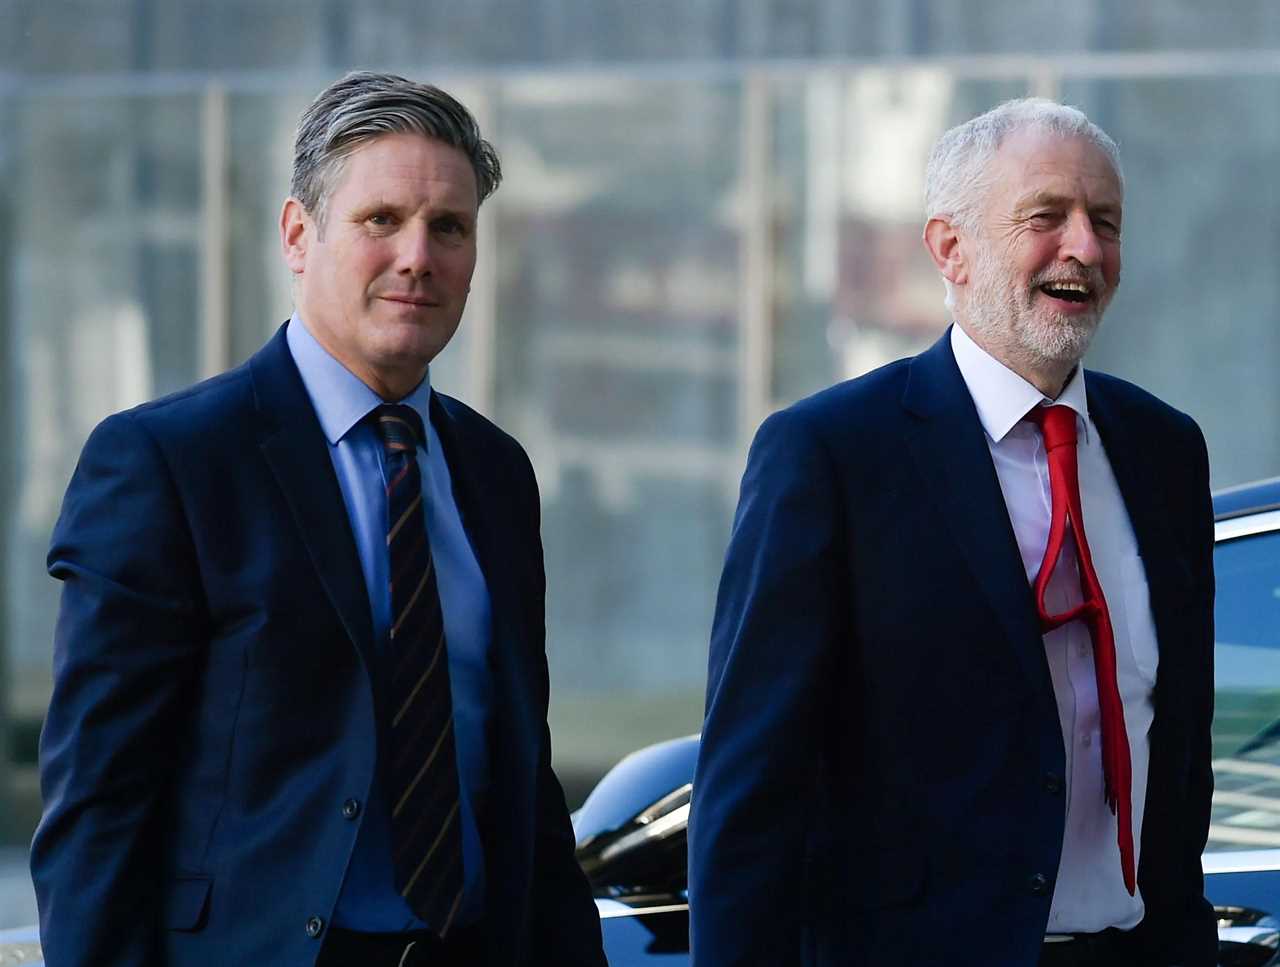 Jeremy Corbyn is banned from standing as Labour MP at next general election by Starmer